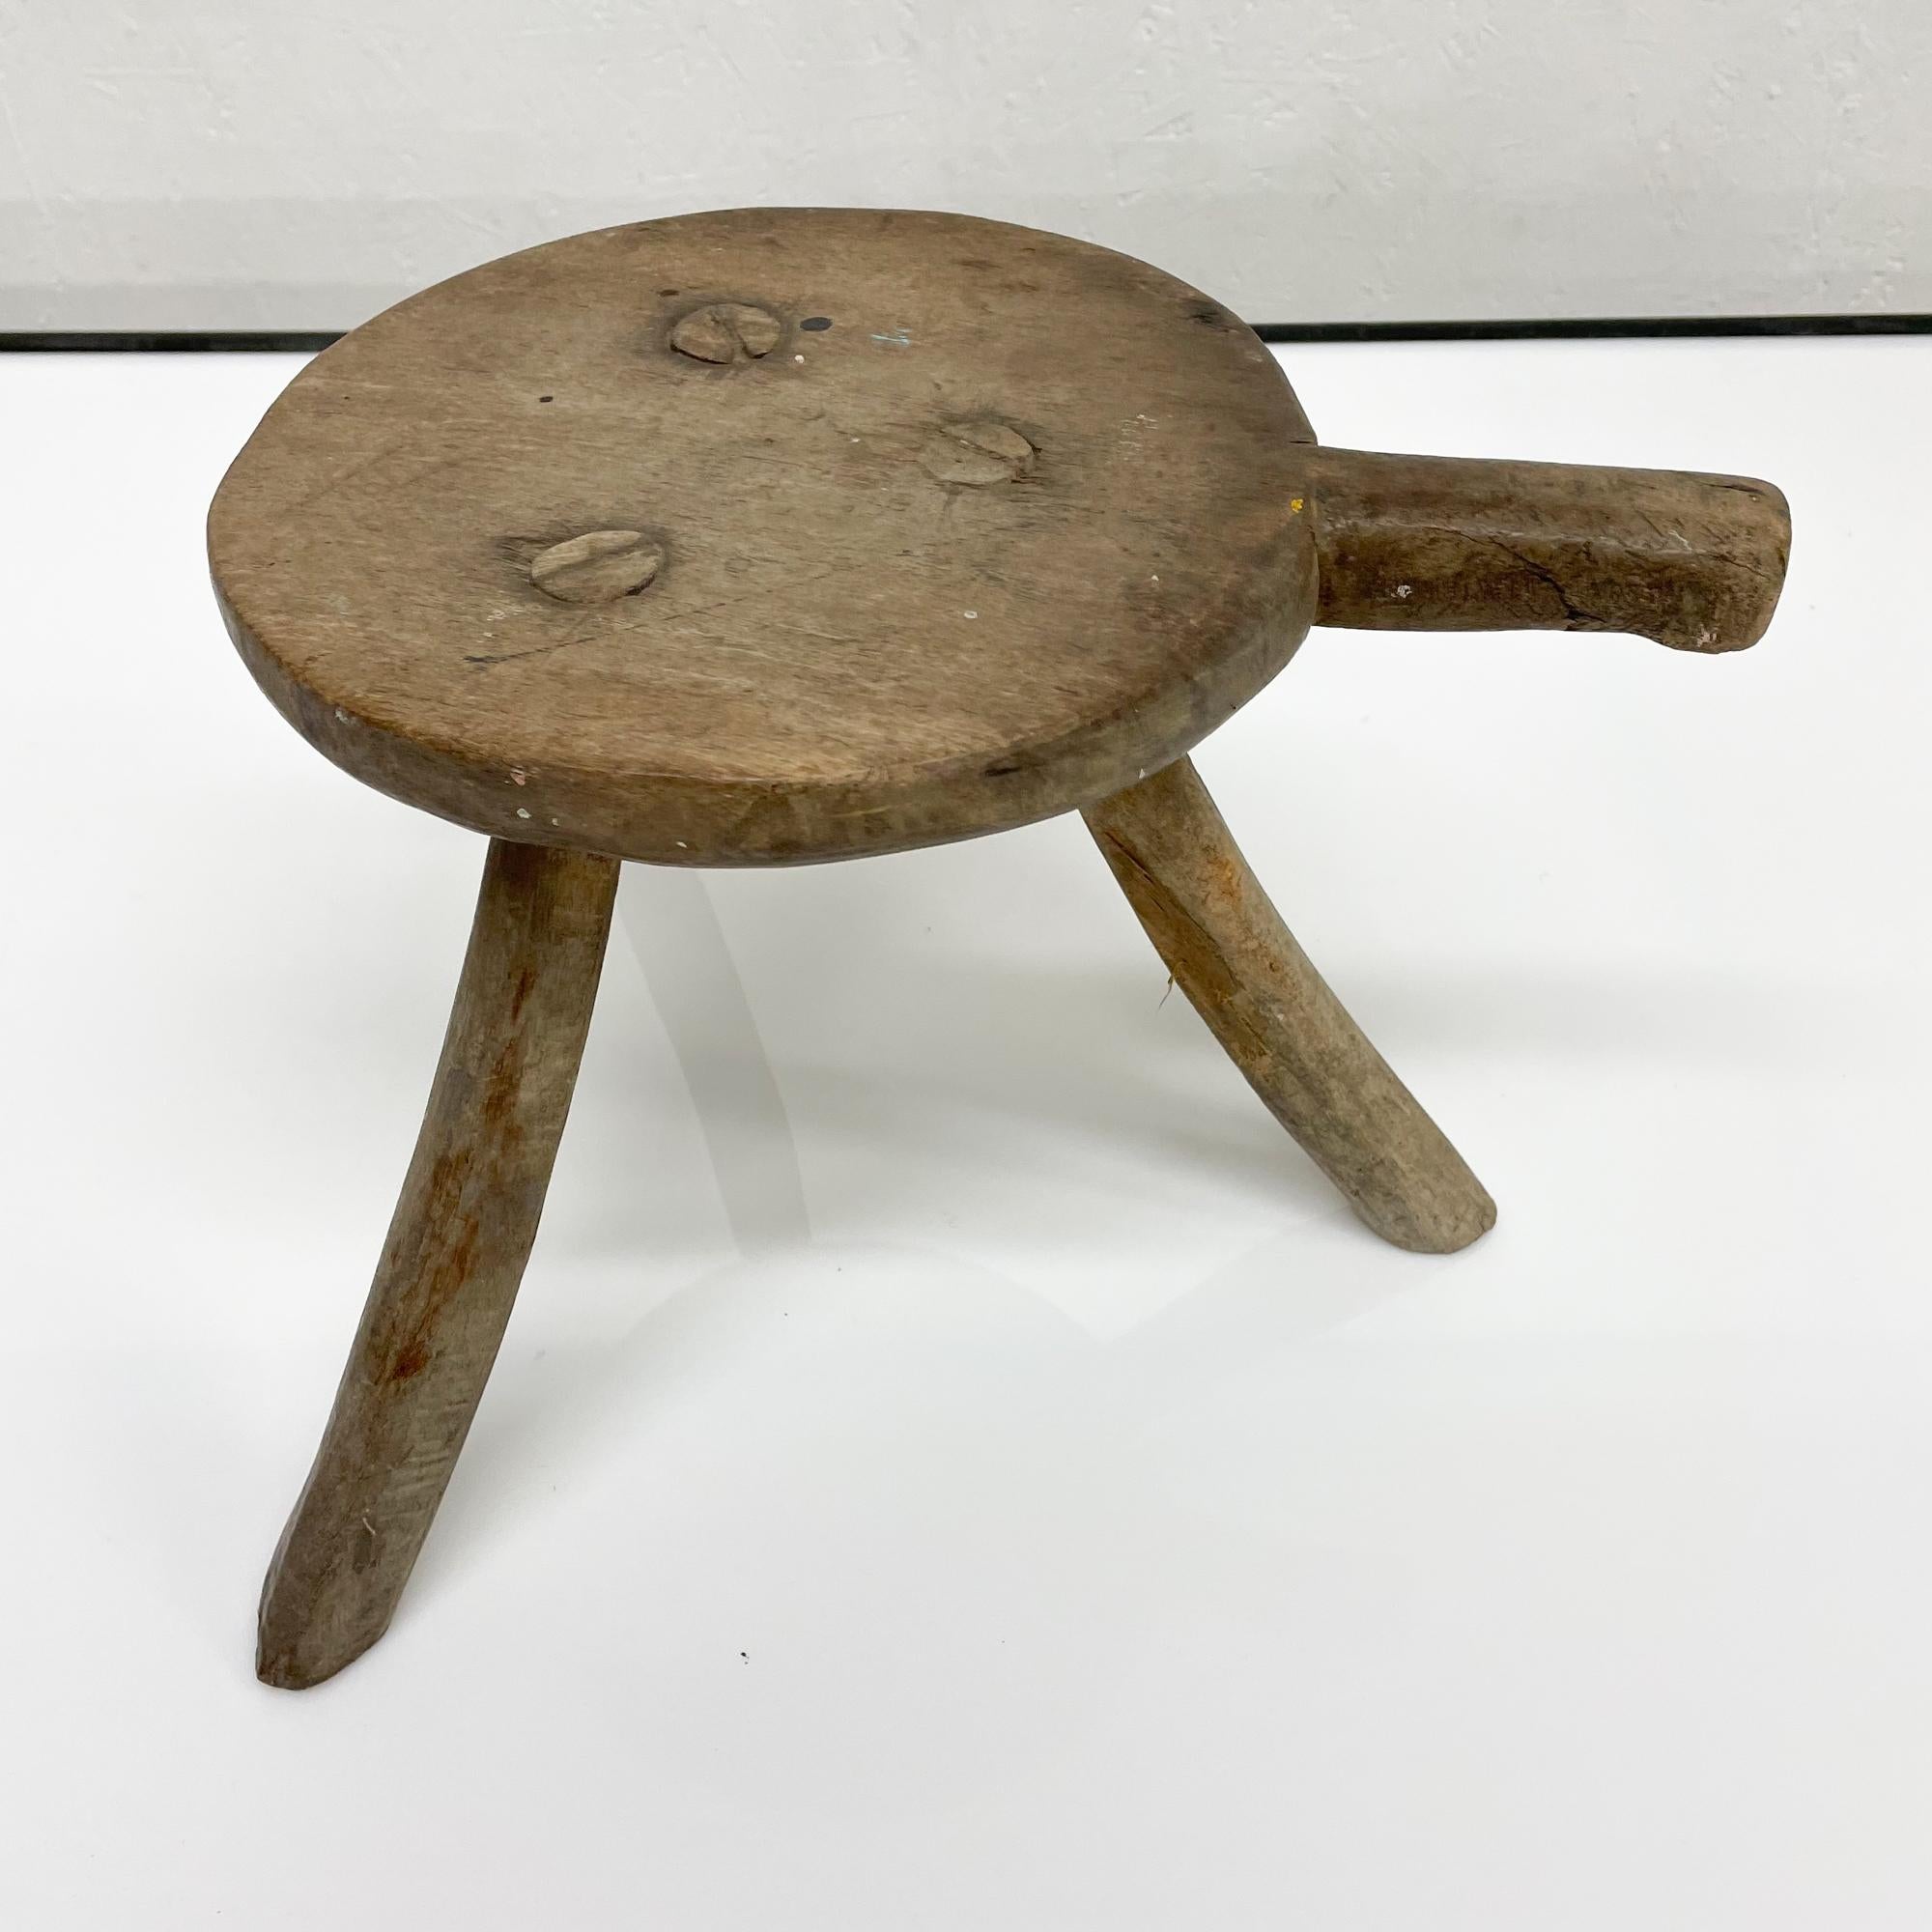 For your consideration a vintage-antique tripod stool. Constructed with mesquite wood.

Firm and sturdy. 
Original vintage unrestored condition. Fair condition. 
Made in Mexico early the 1900s

Dimensions: 9.5